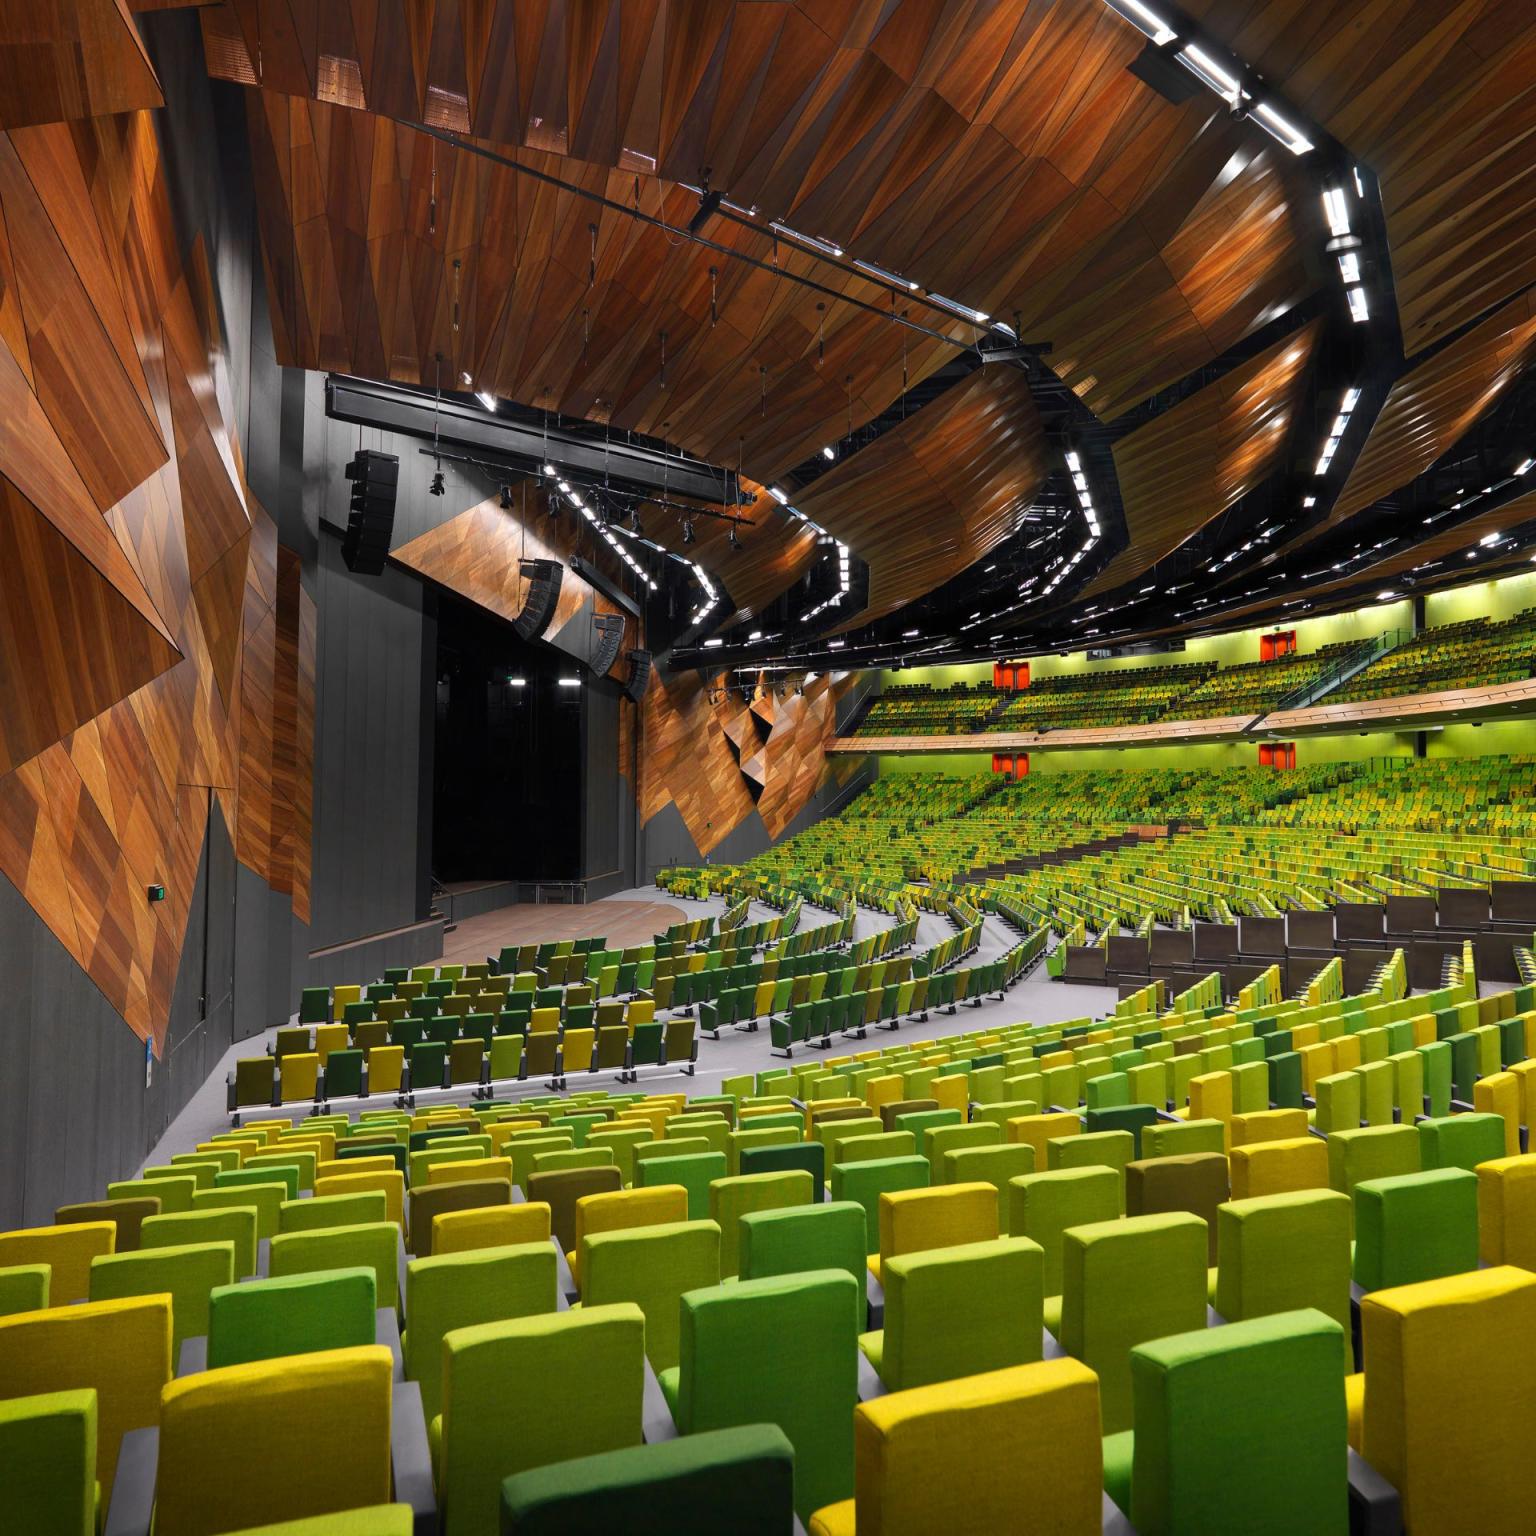 Side view of stage in a large plenary theatre. The rows of seats are made up of different shades of green and yellow.